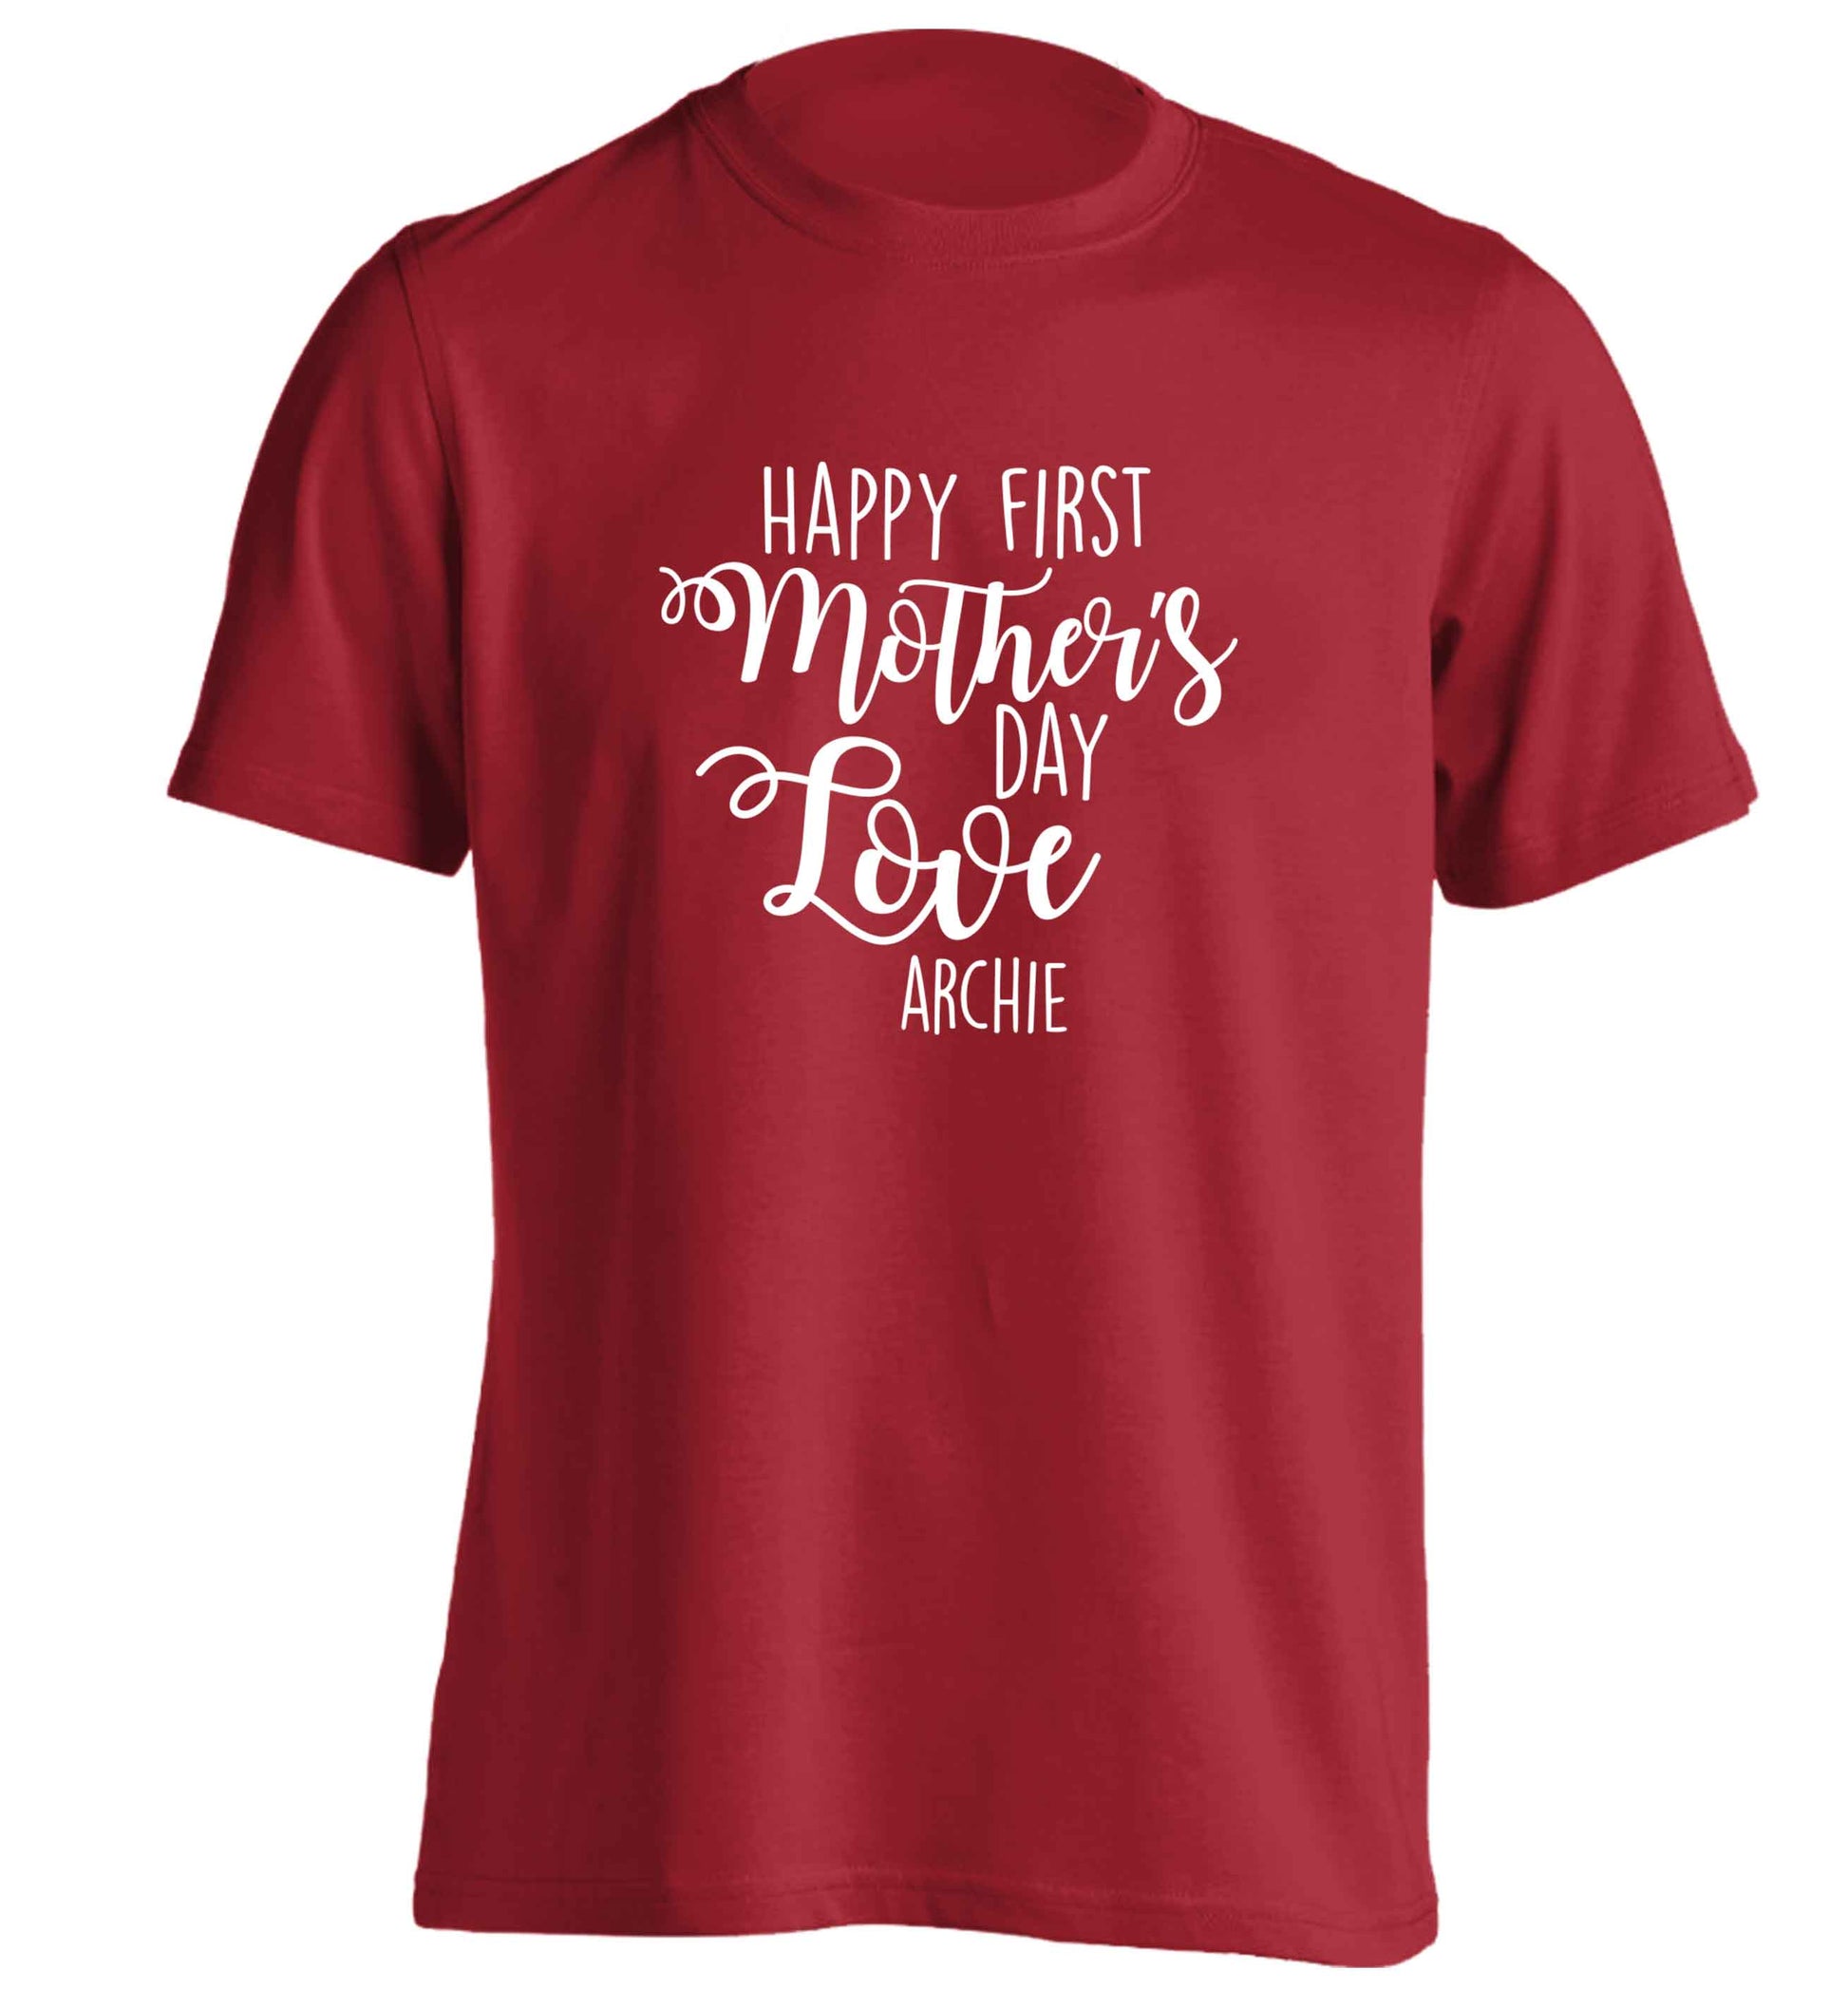 Mummy's first mother's day! adults unisex red Tshirt 2XL